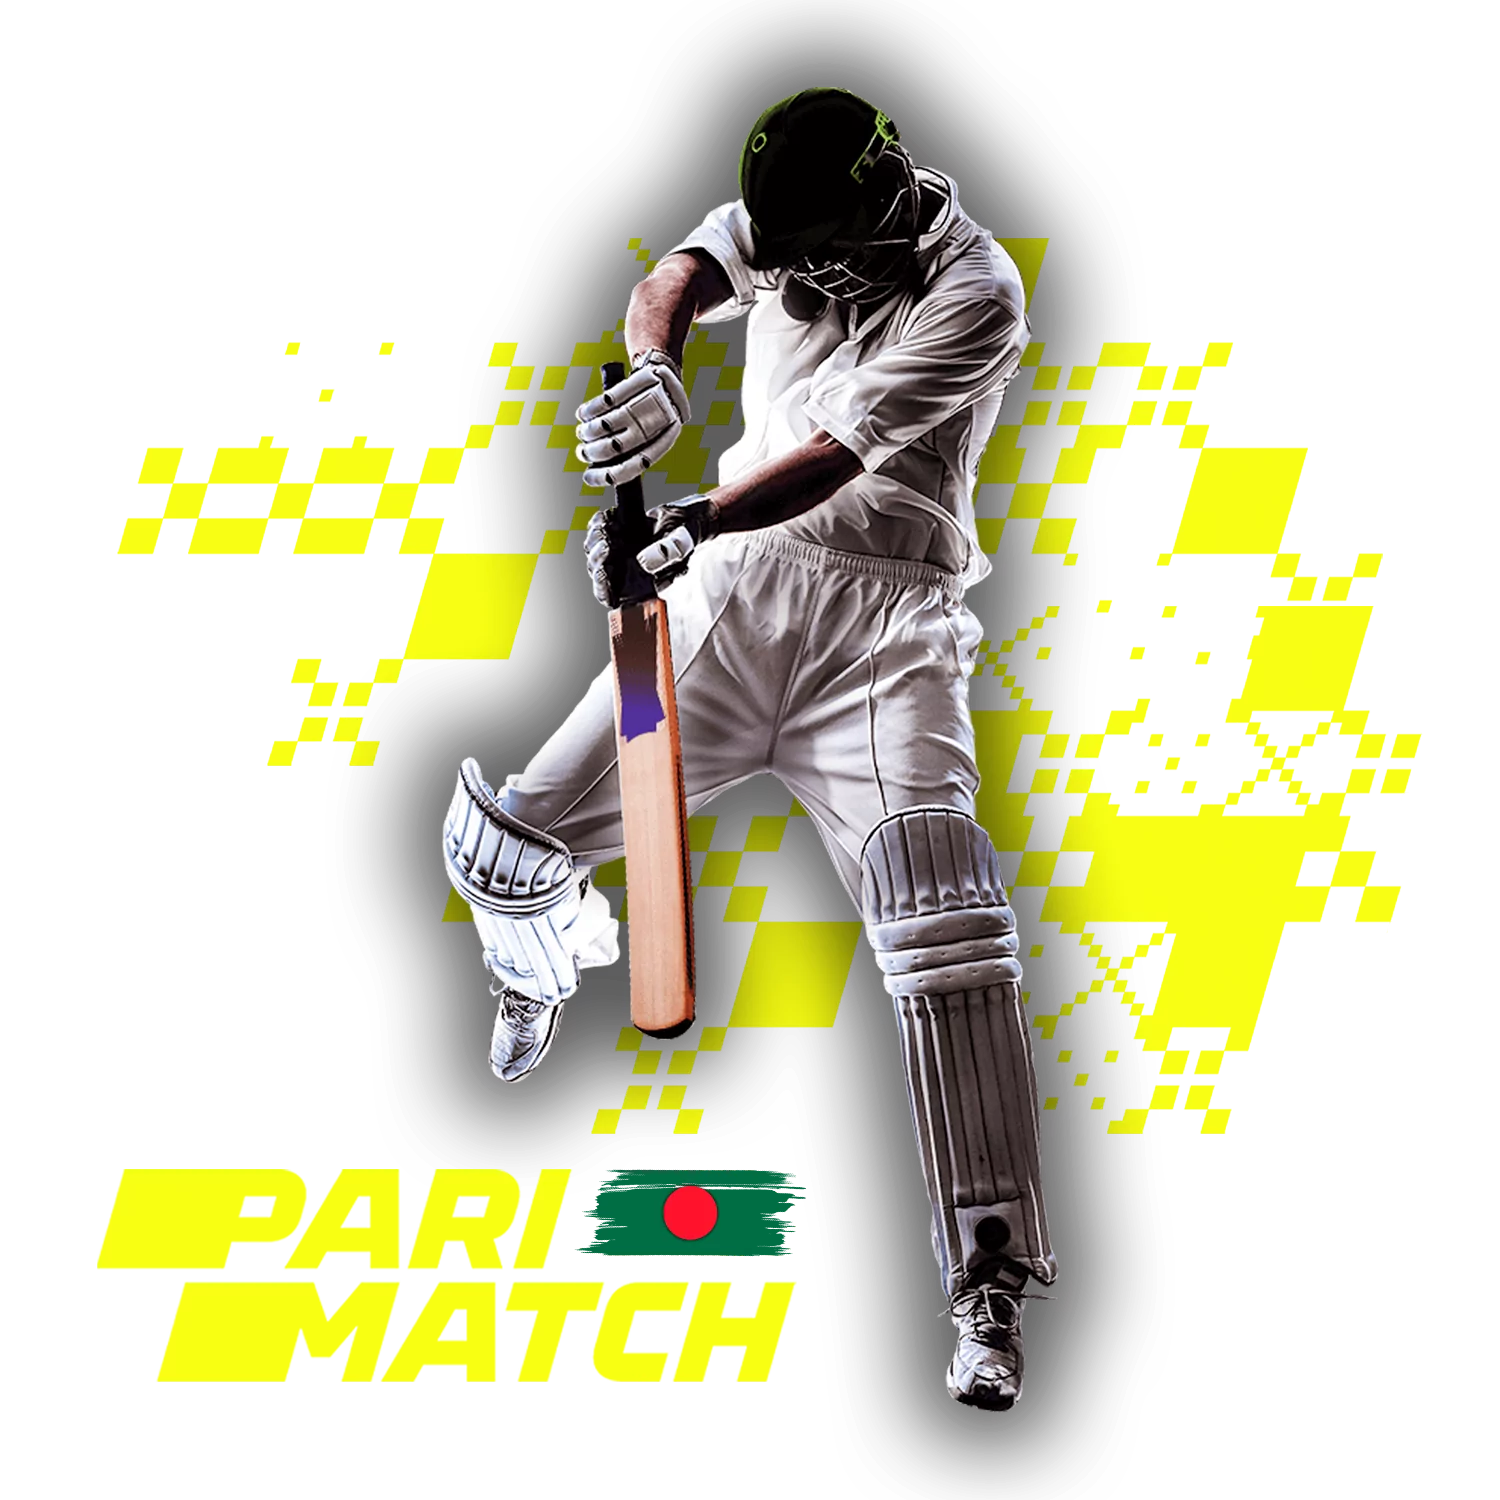 Cricket and other sports betting at Parimatch Bangladesh.